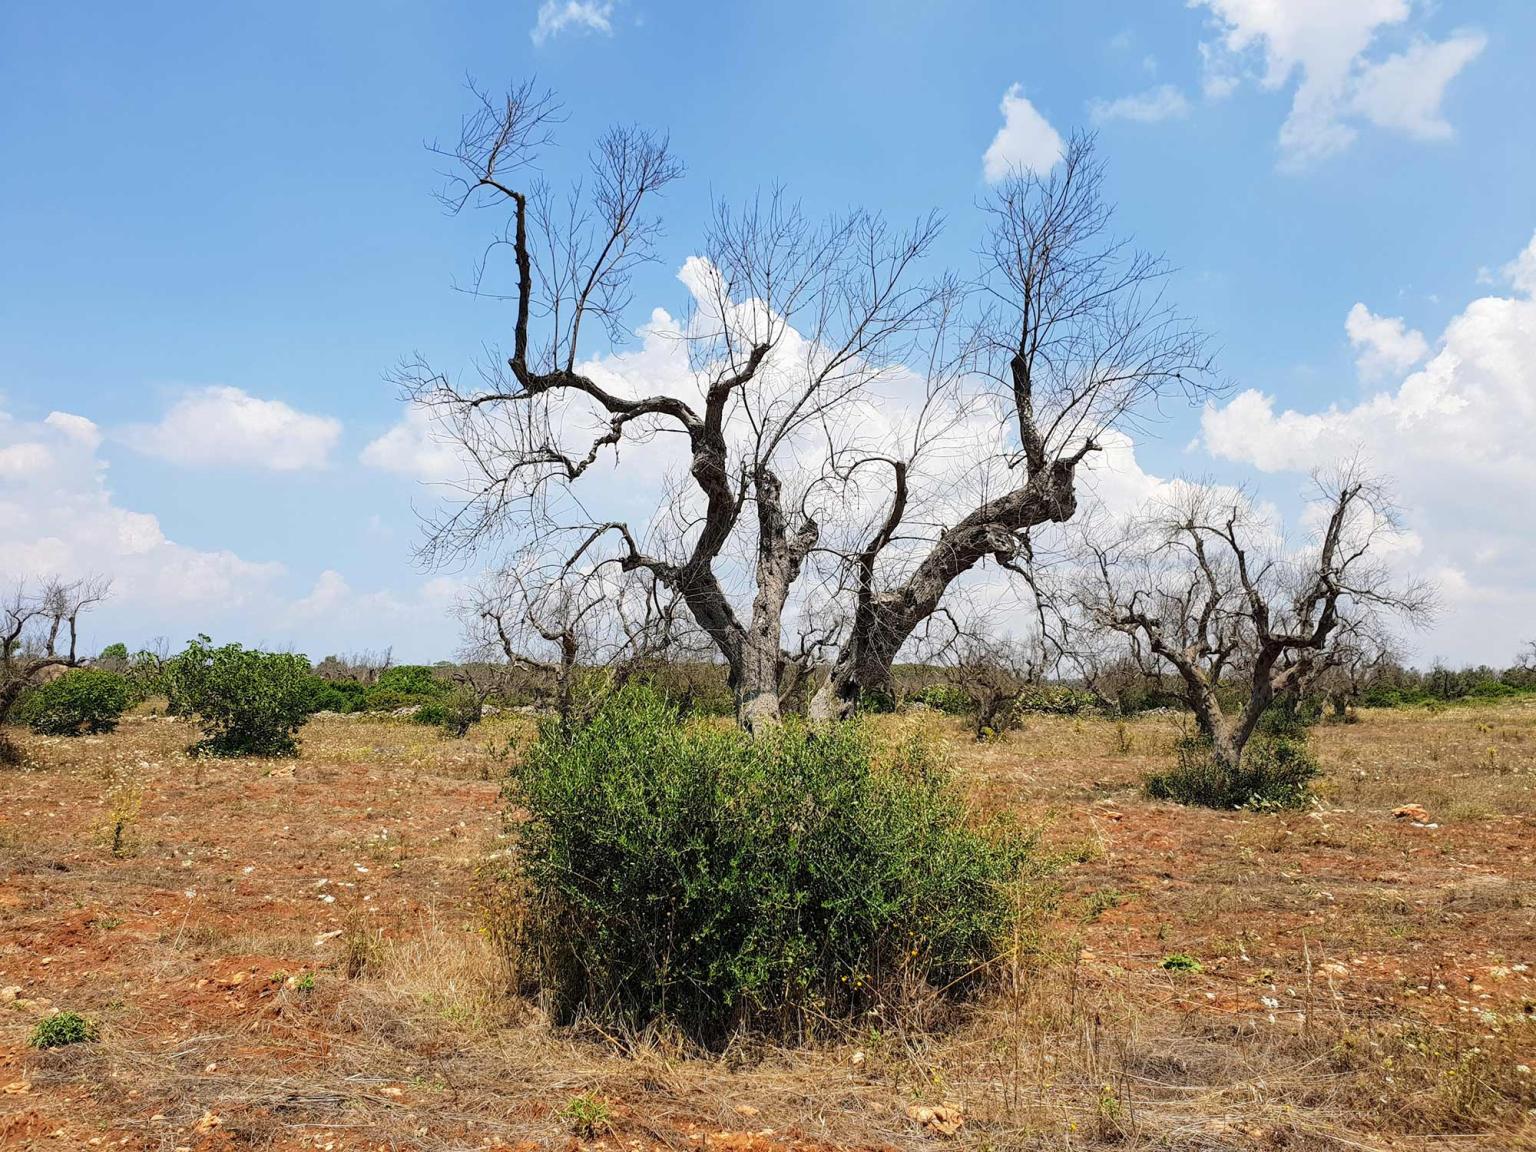 An olive tree damaged by Xylella fastidiosa in Puglia, Italy